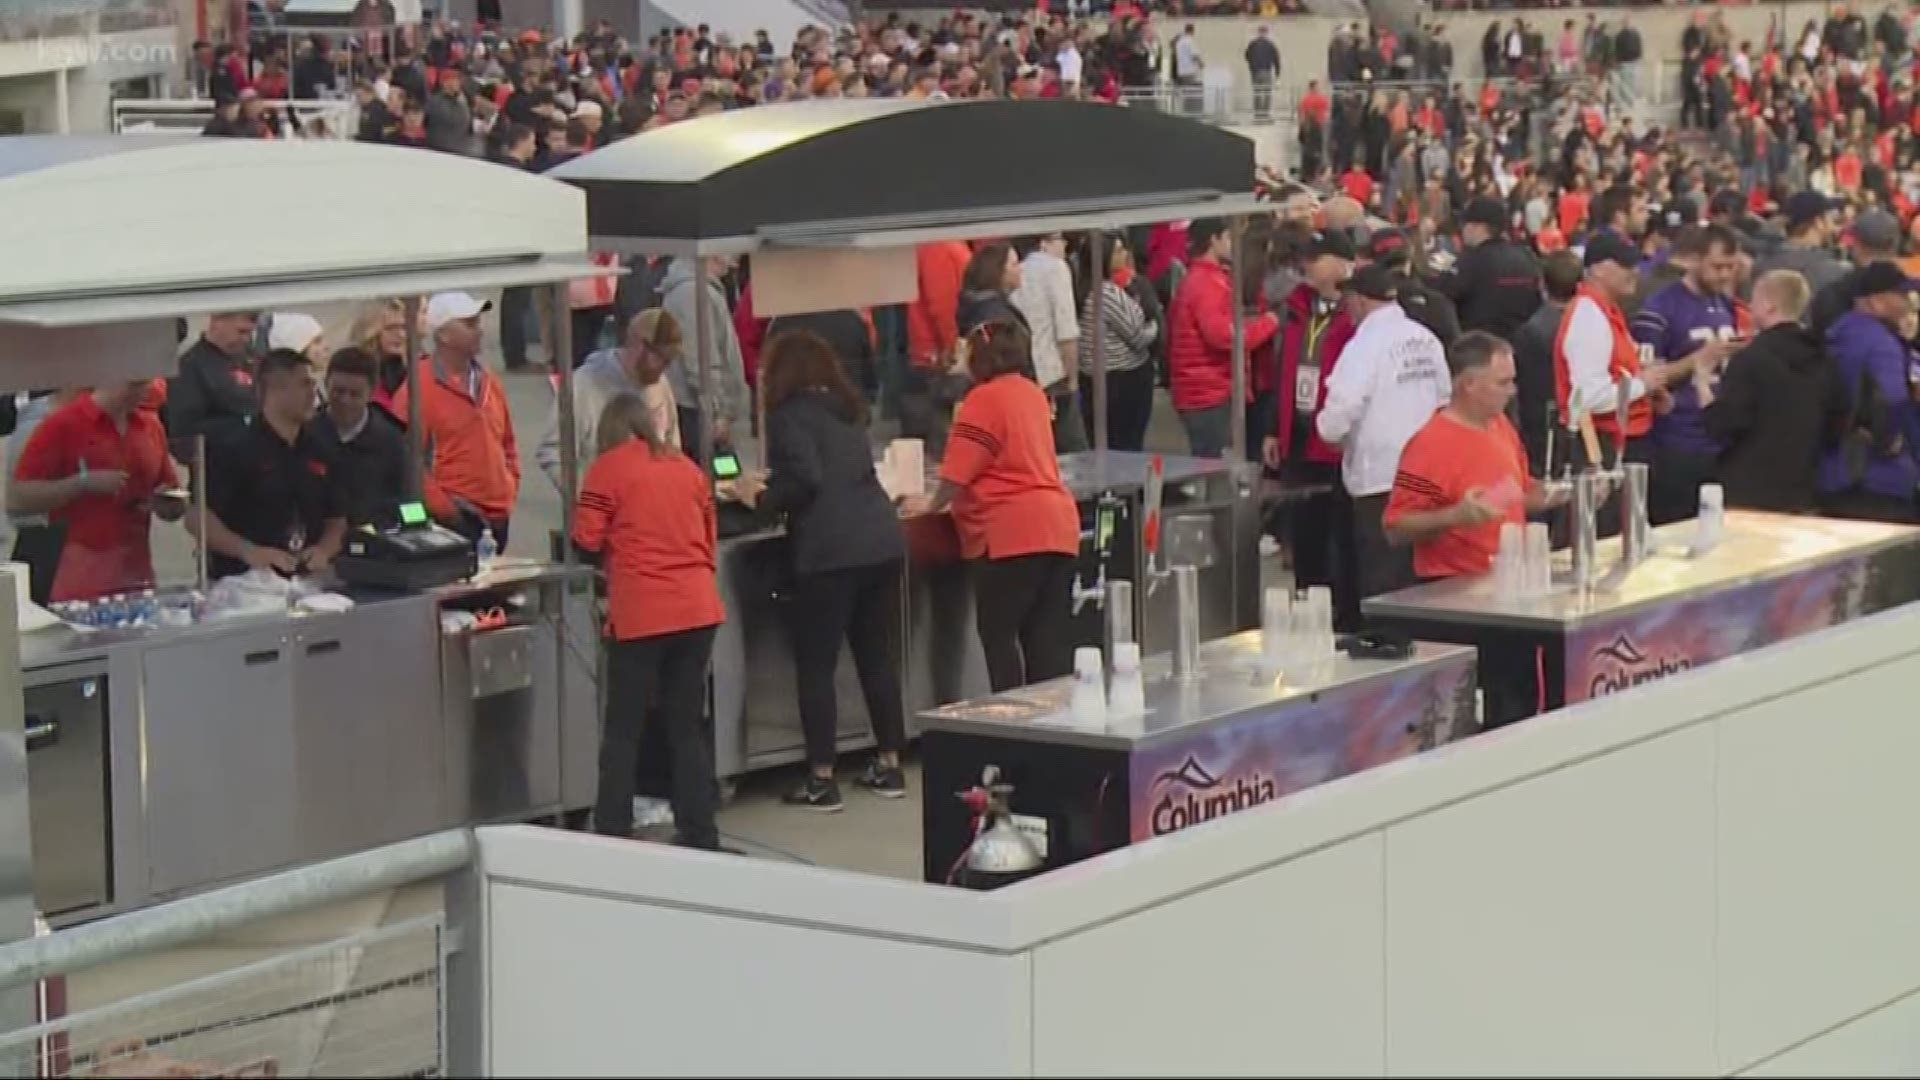 More stadiums are serving alcohol at college games.